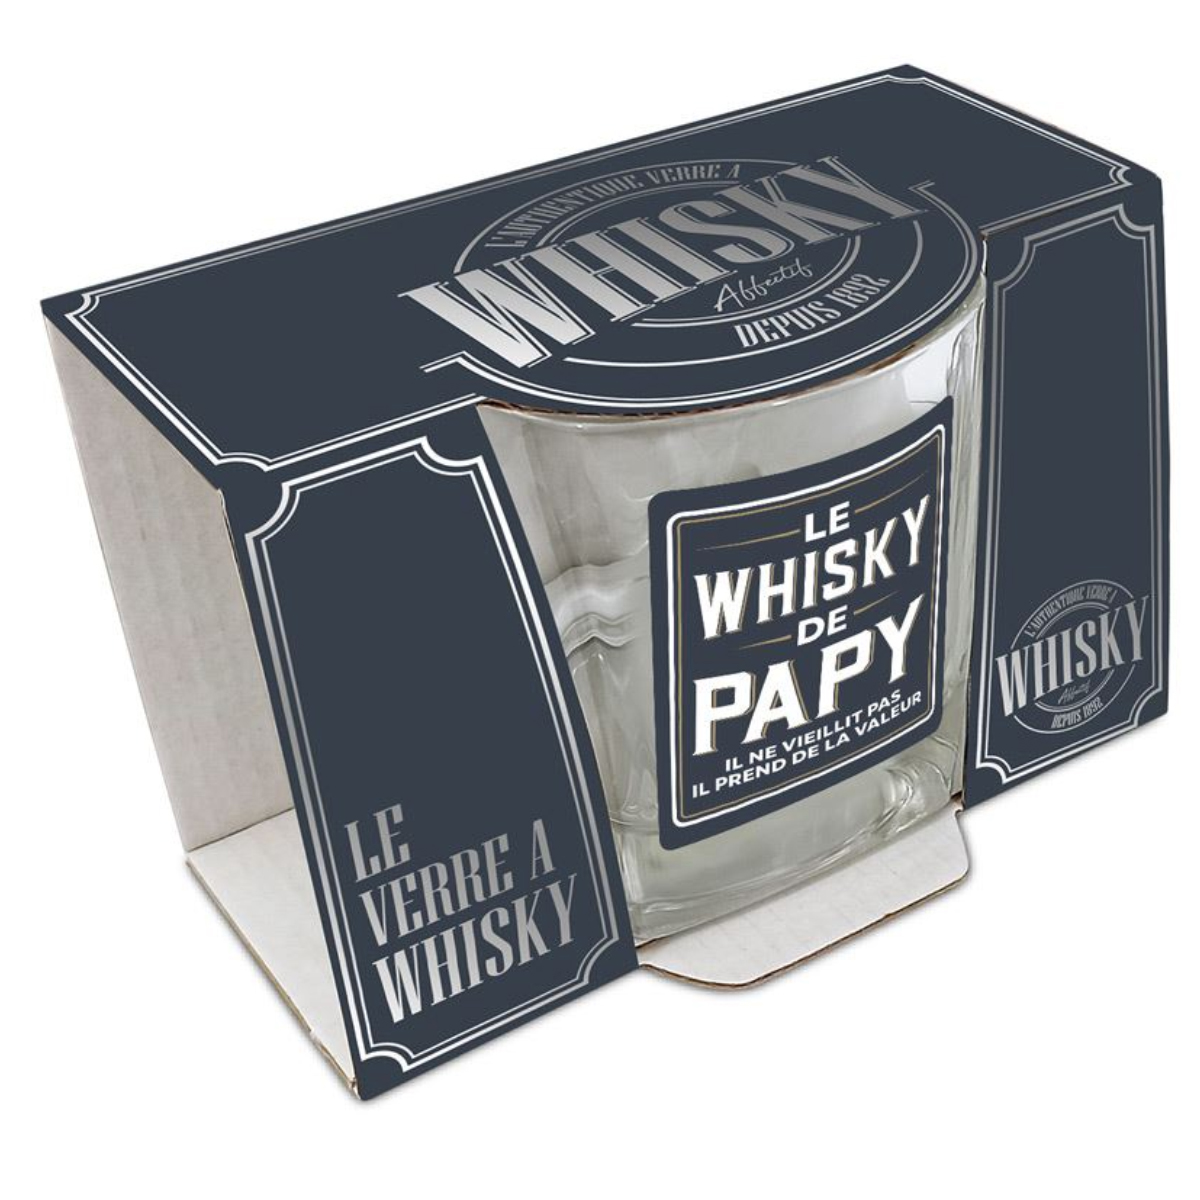 Whiskey glass - le whisky de papy